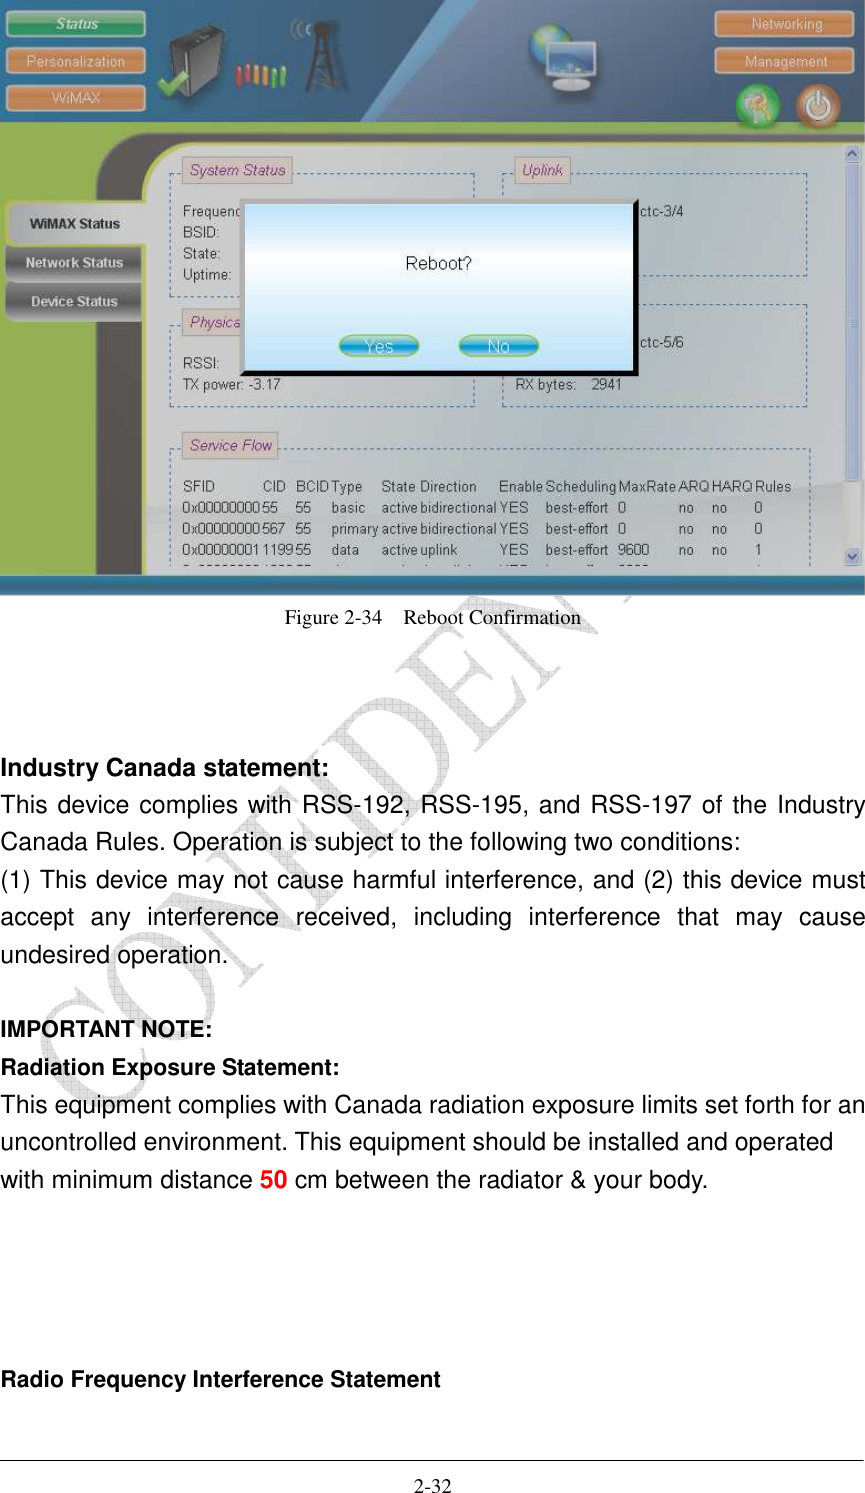    2-32  Figure 2-34    Reboot Confirmation    Industry Canada statement: This device complies with RSS-192, RSS-195, and RSS-197 of the Industry Canada Rules. Operation is subject to the following two conditions:   (1) This device may not cause harmful interference, and (2) this device must accept  any  interference  received,  including  interference  that  may  cause undesired operation.  IMPORTANT NOTE: Radiation Exposure Statement: This equipment complies with Canada radiation exposure limits set forth for an uncontrolled environment. This equipment should be installed and operated with minimum distance 50 cm between the radiator &amp; your body.     Radio Frequency Interference Statement   